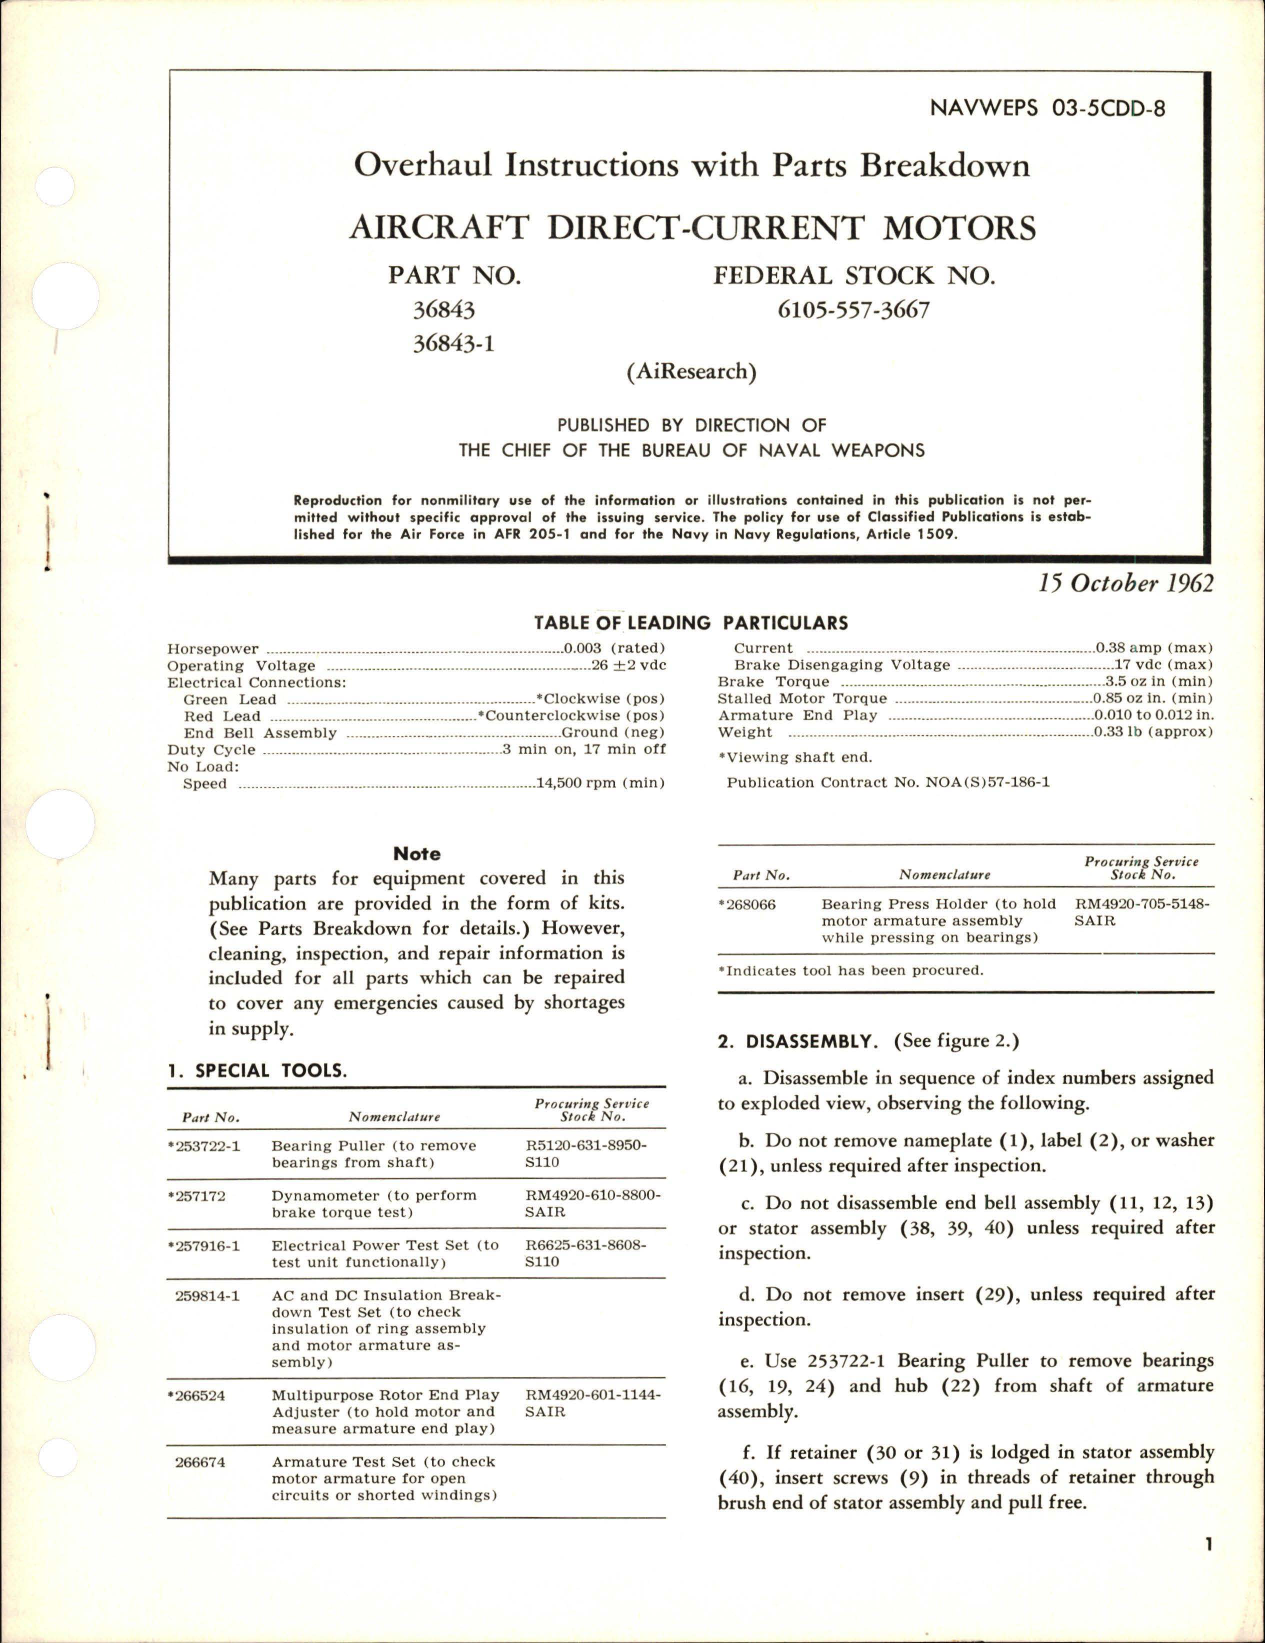 Sample page 1 from AirCorps Library document: Overhaul Instructions with Parts Breakdown for Direct Current Motors - Parts 36843 and 36843-1